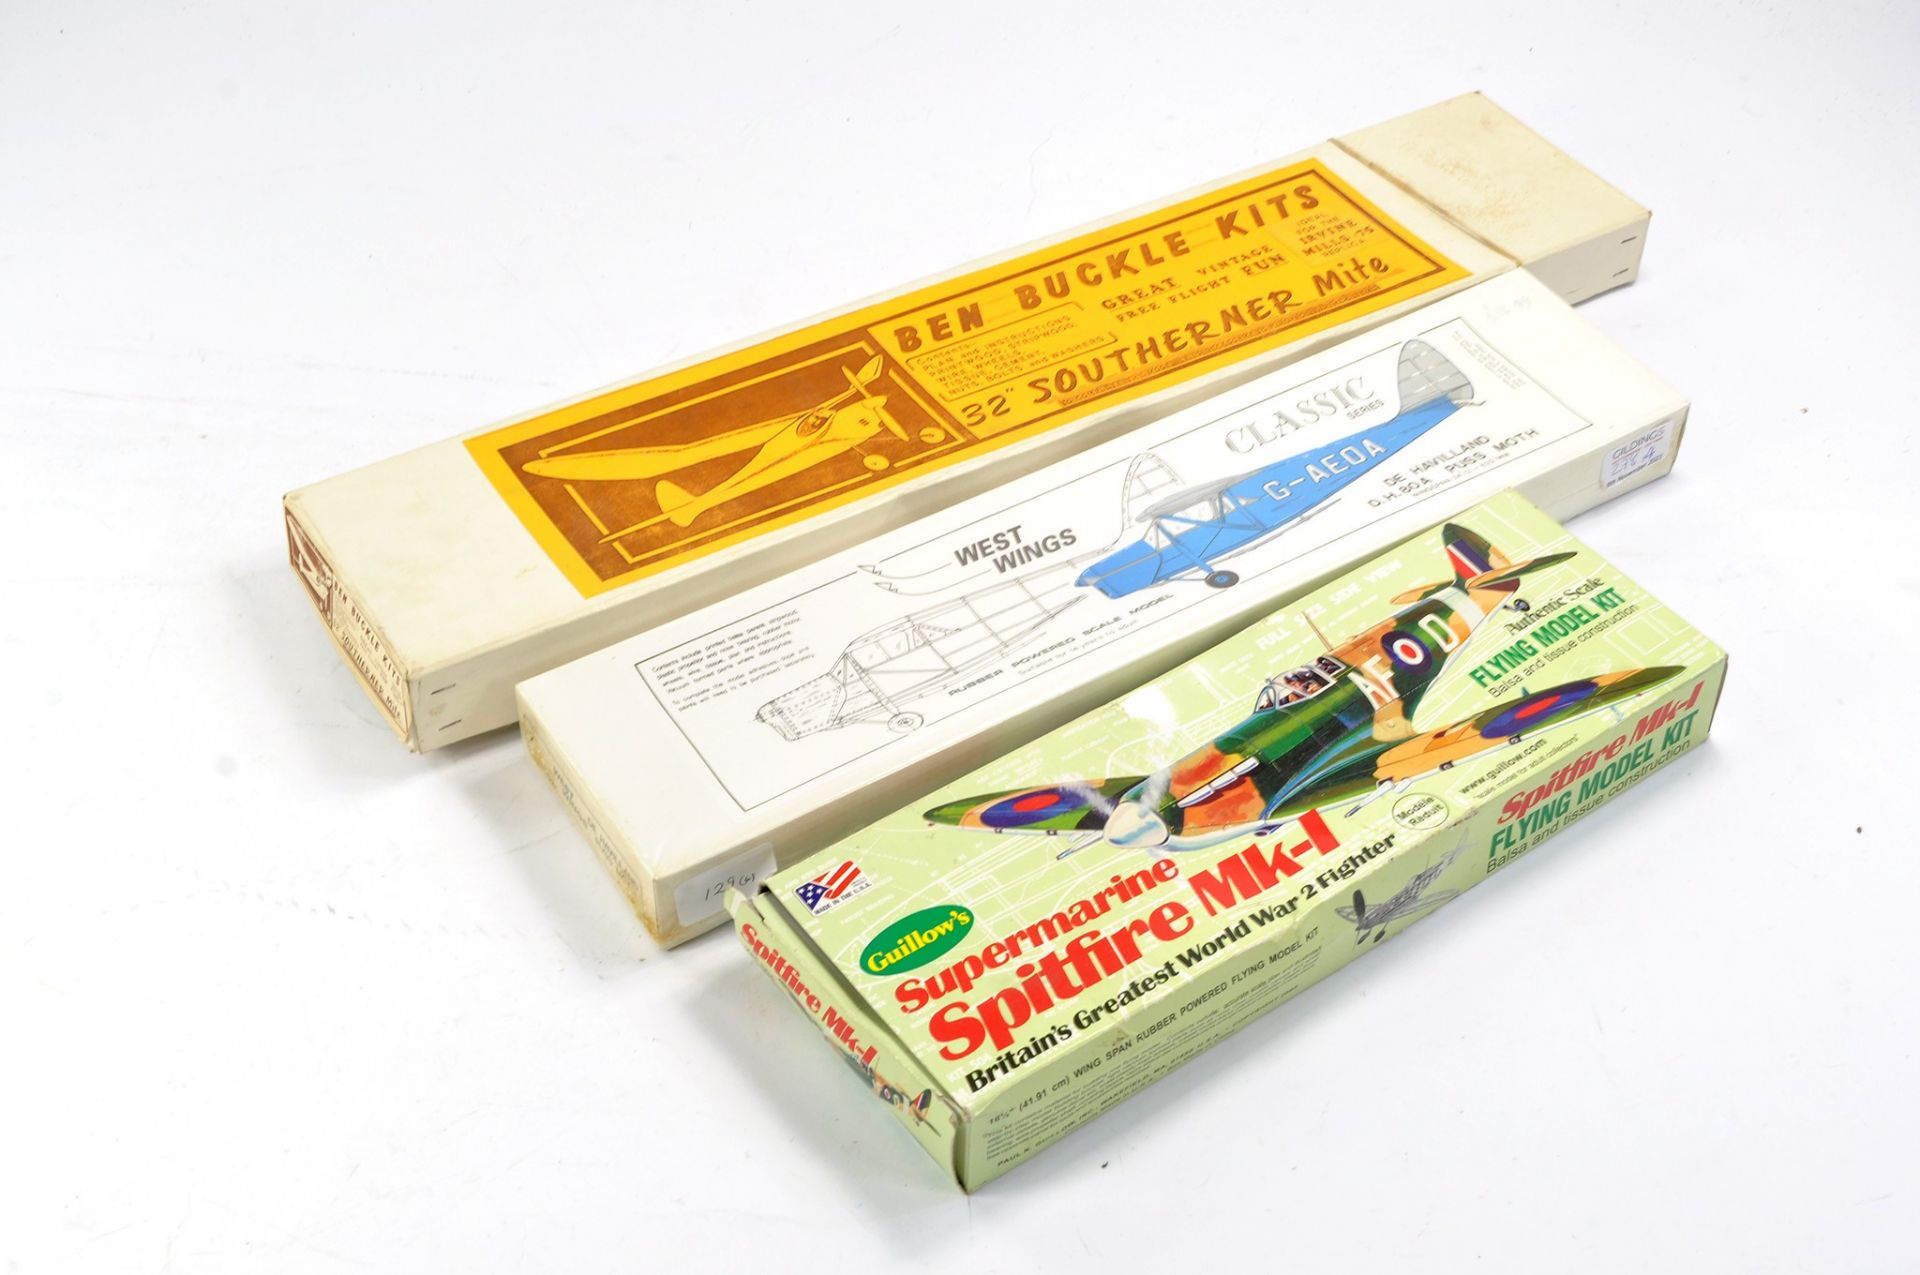 Model Aircraft Kits comprising Ben Buckle 32 Southerner, Guillows Spitfire MK1 and West Wings De